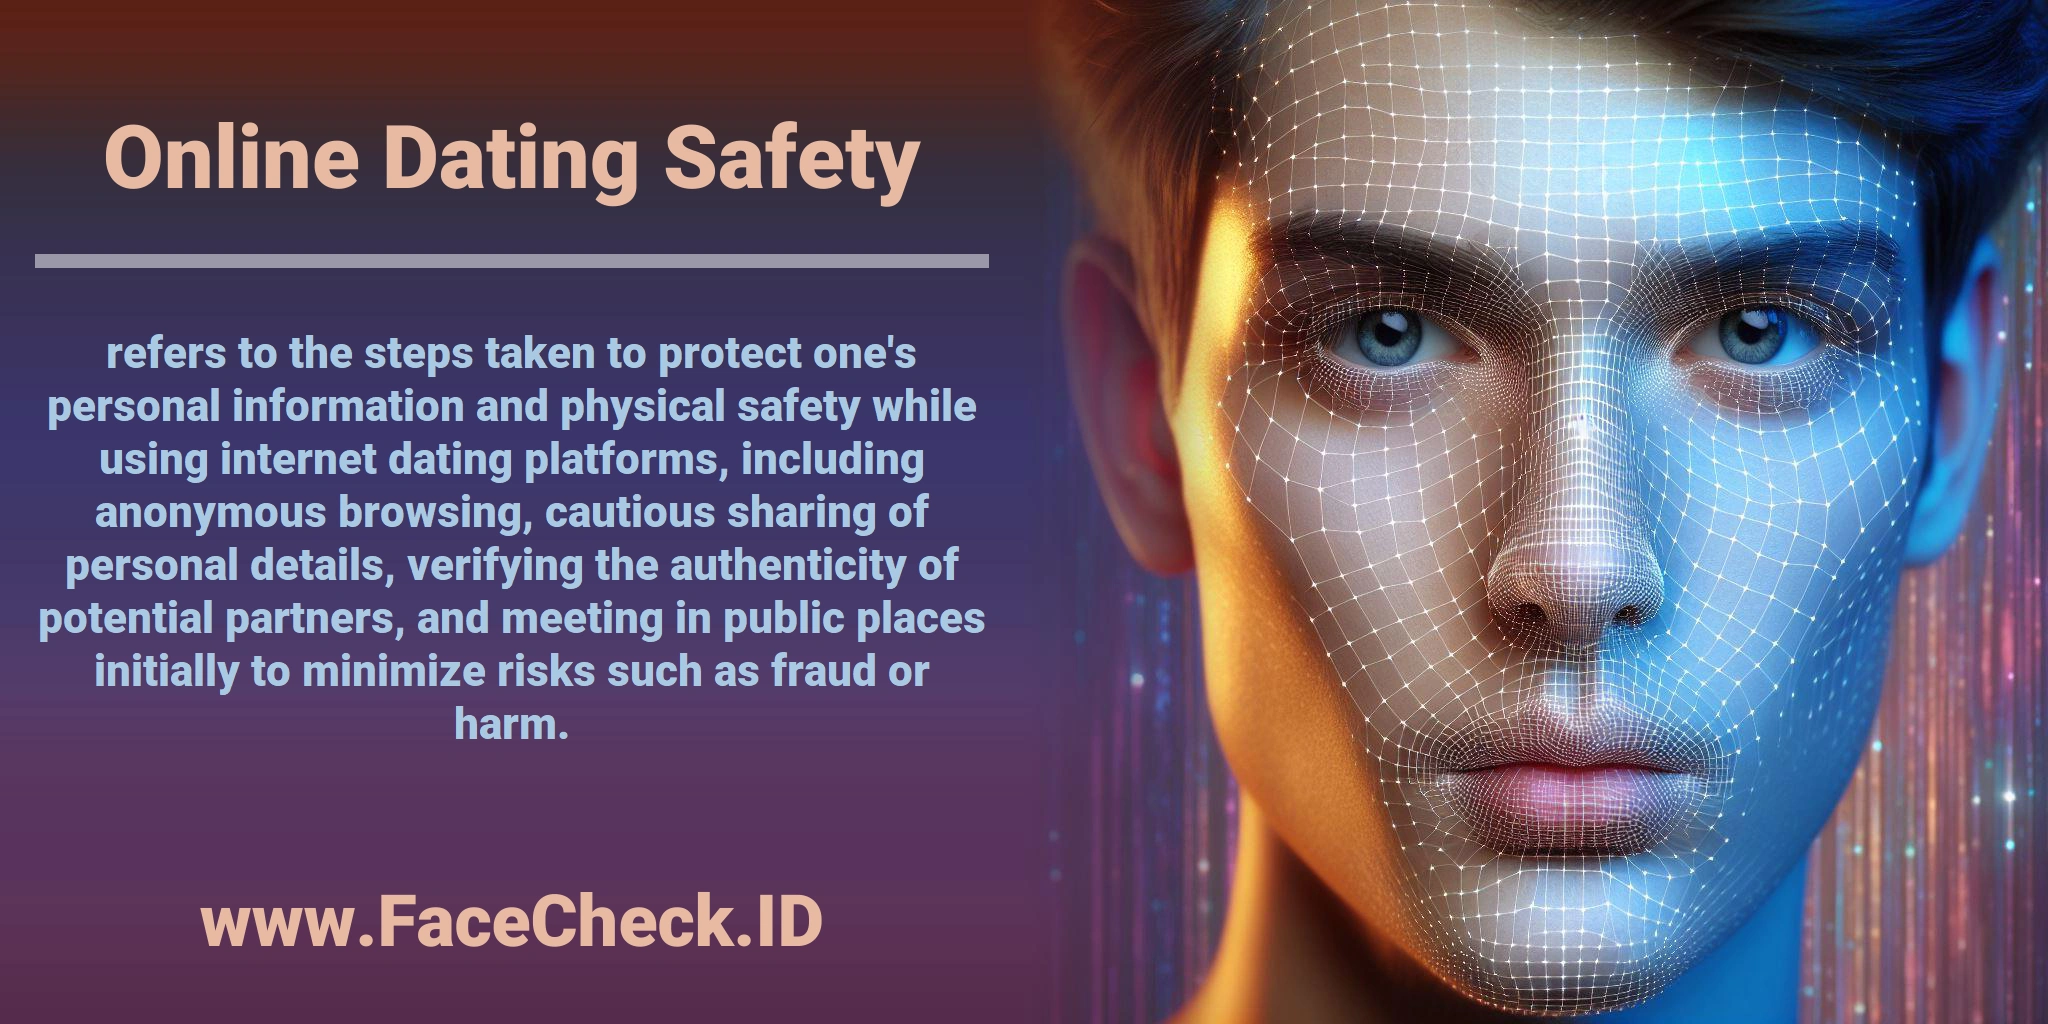 <b>Online Dating Safety</b> refers to the steps taken to protect one's personal information and physical safety while using internet dating platforms, including anonymous browsing, cautious sharing of personal details, verifying the authenticity of potential partners, and meeting in public places initially to minimize risks such as fraud or harm.